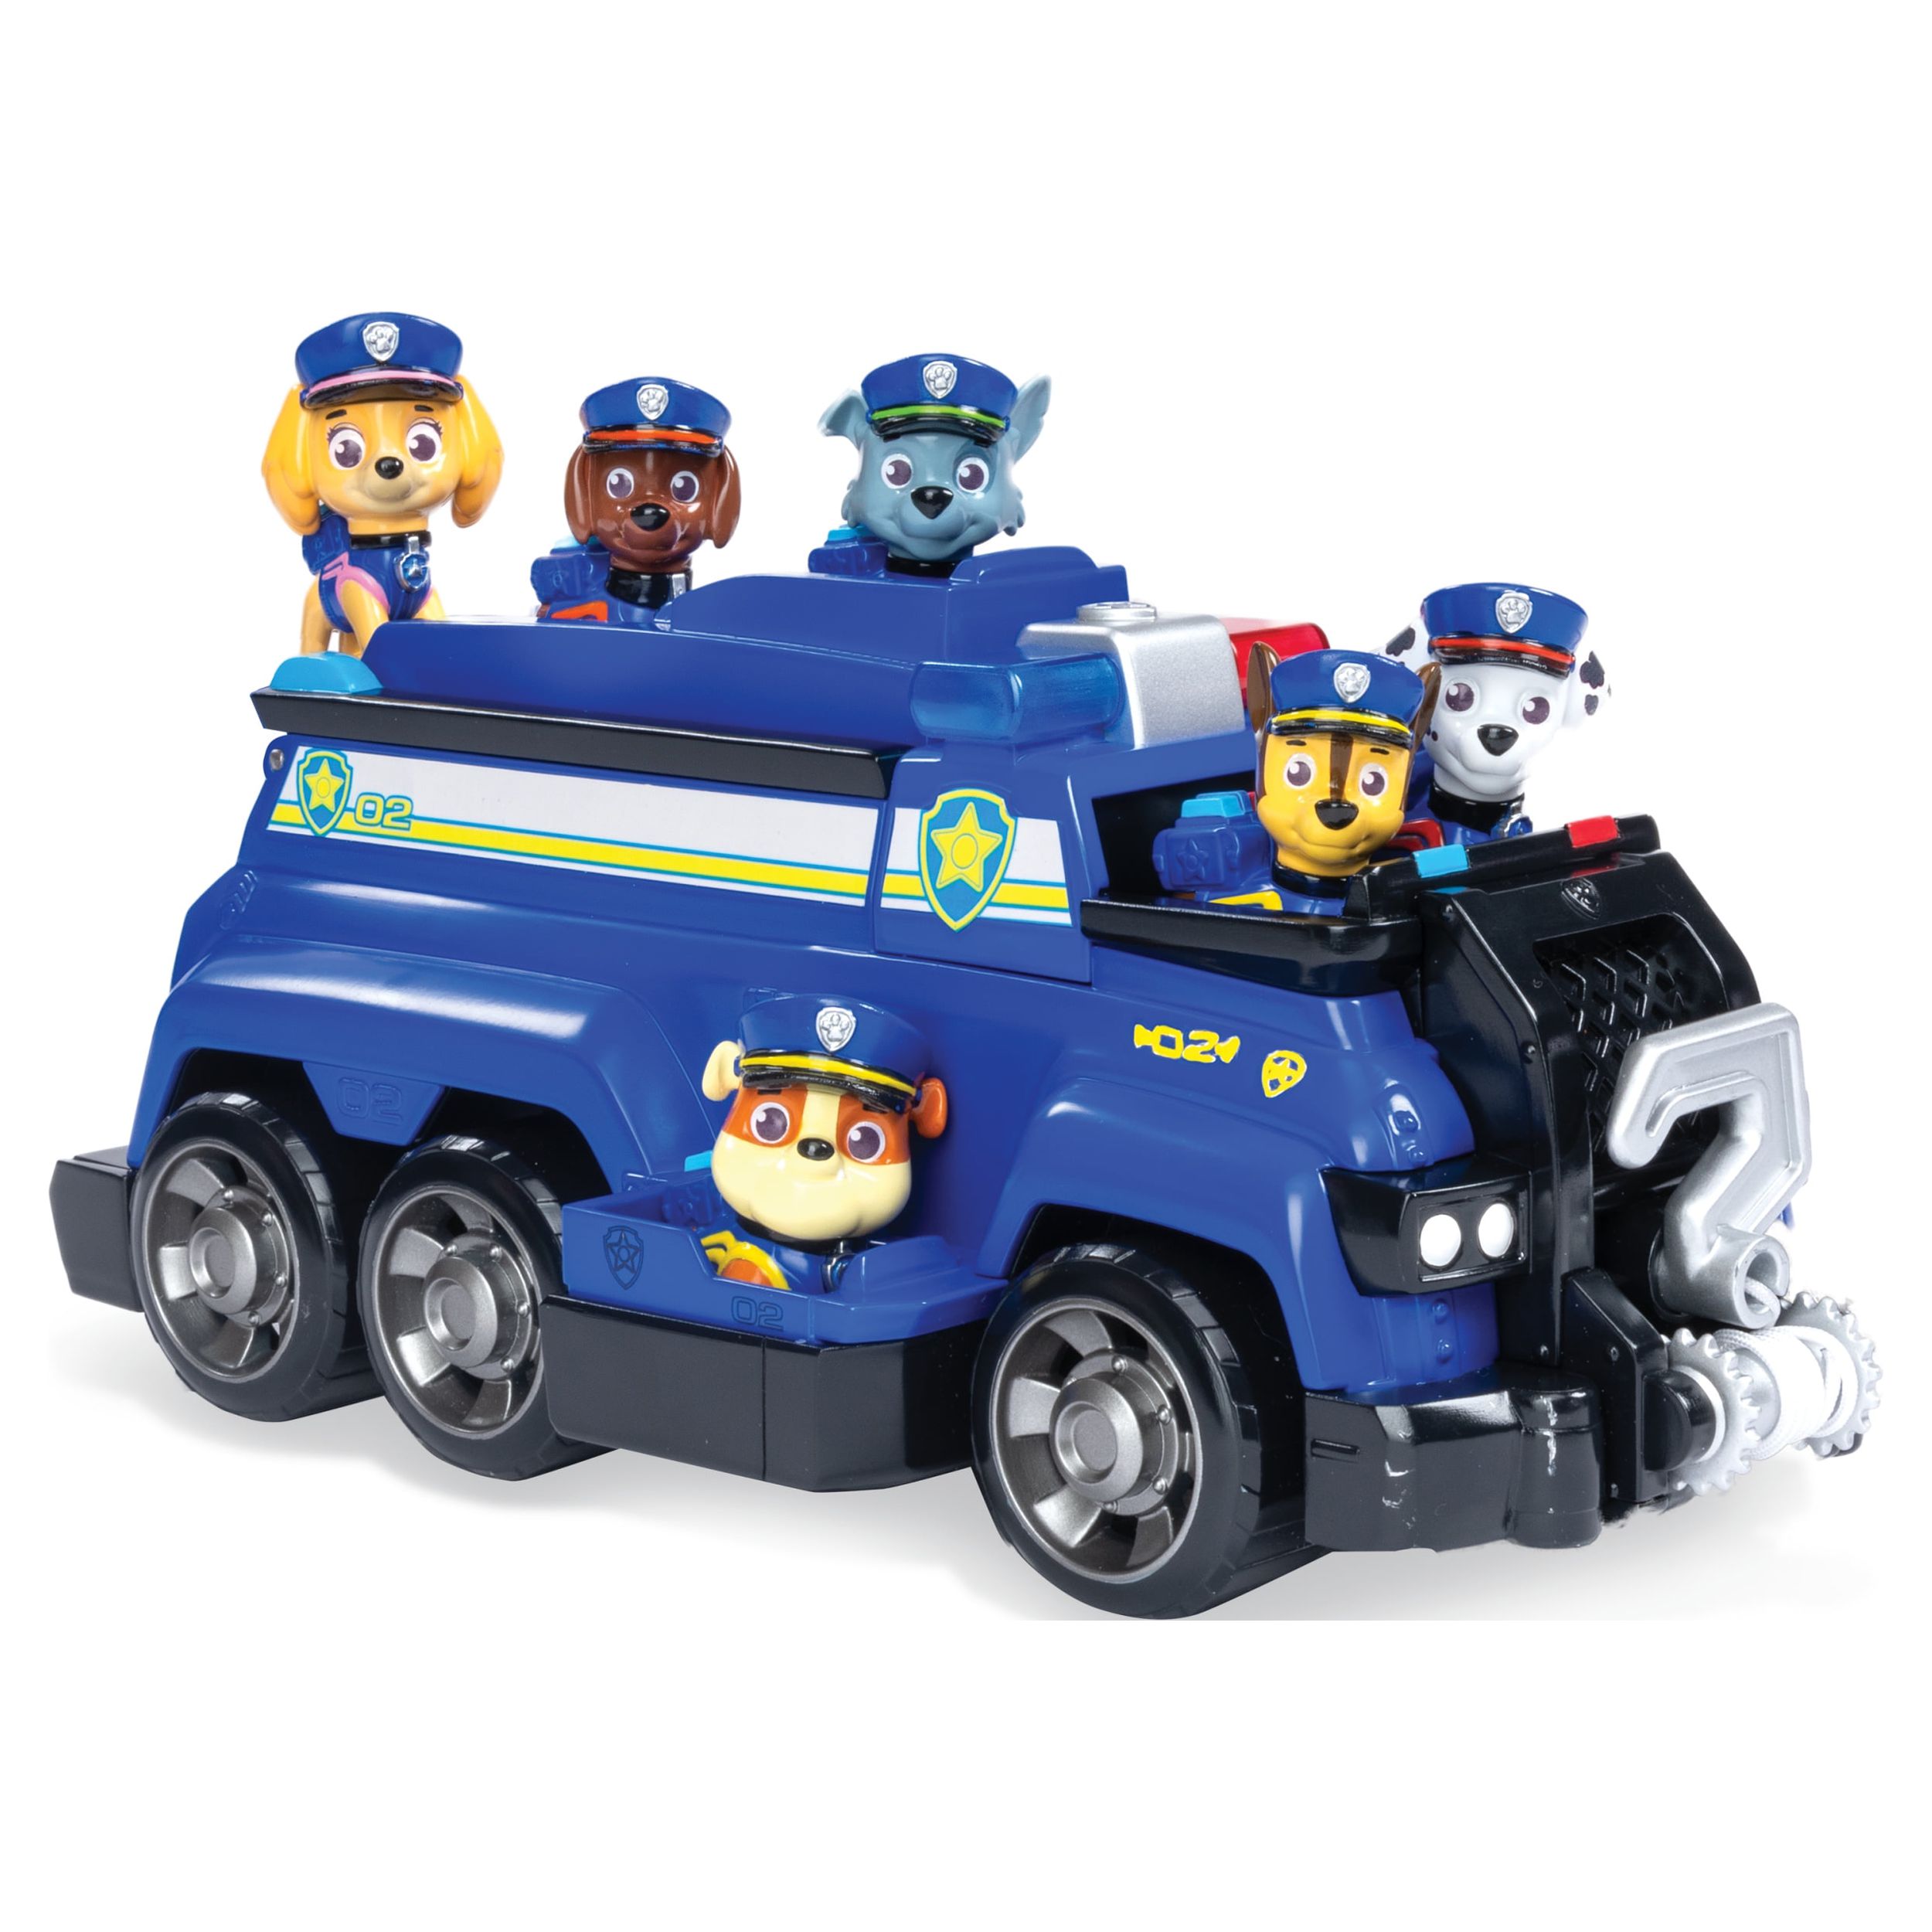 PAW Patrol, Chase’s Total Team Rescue Police Cruiser Vehicle with 6 Pups, for Kids Aged 3 and Up - image 1 of 3